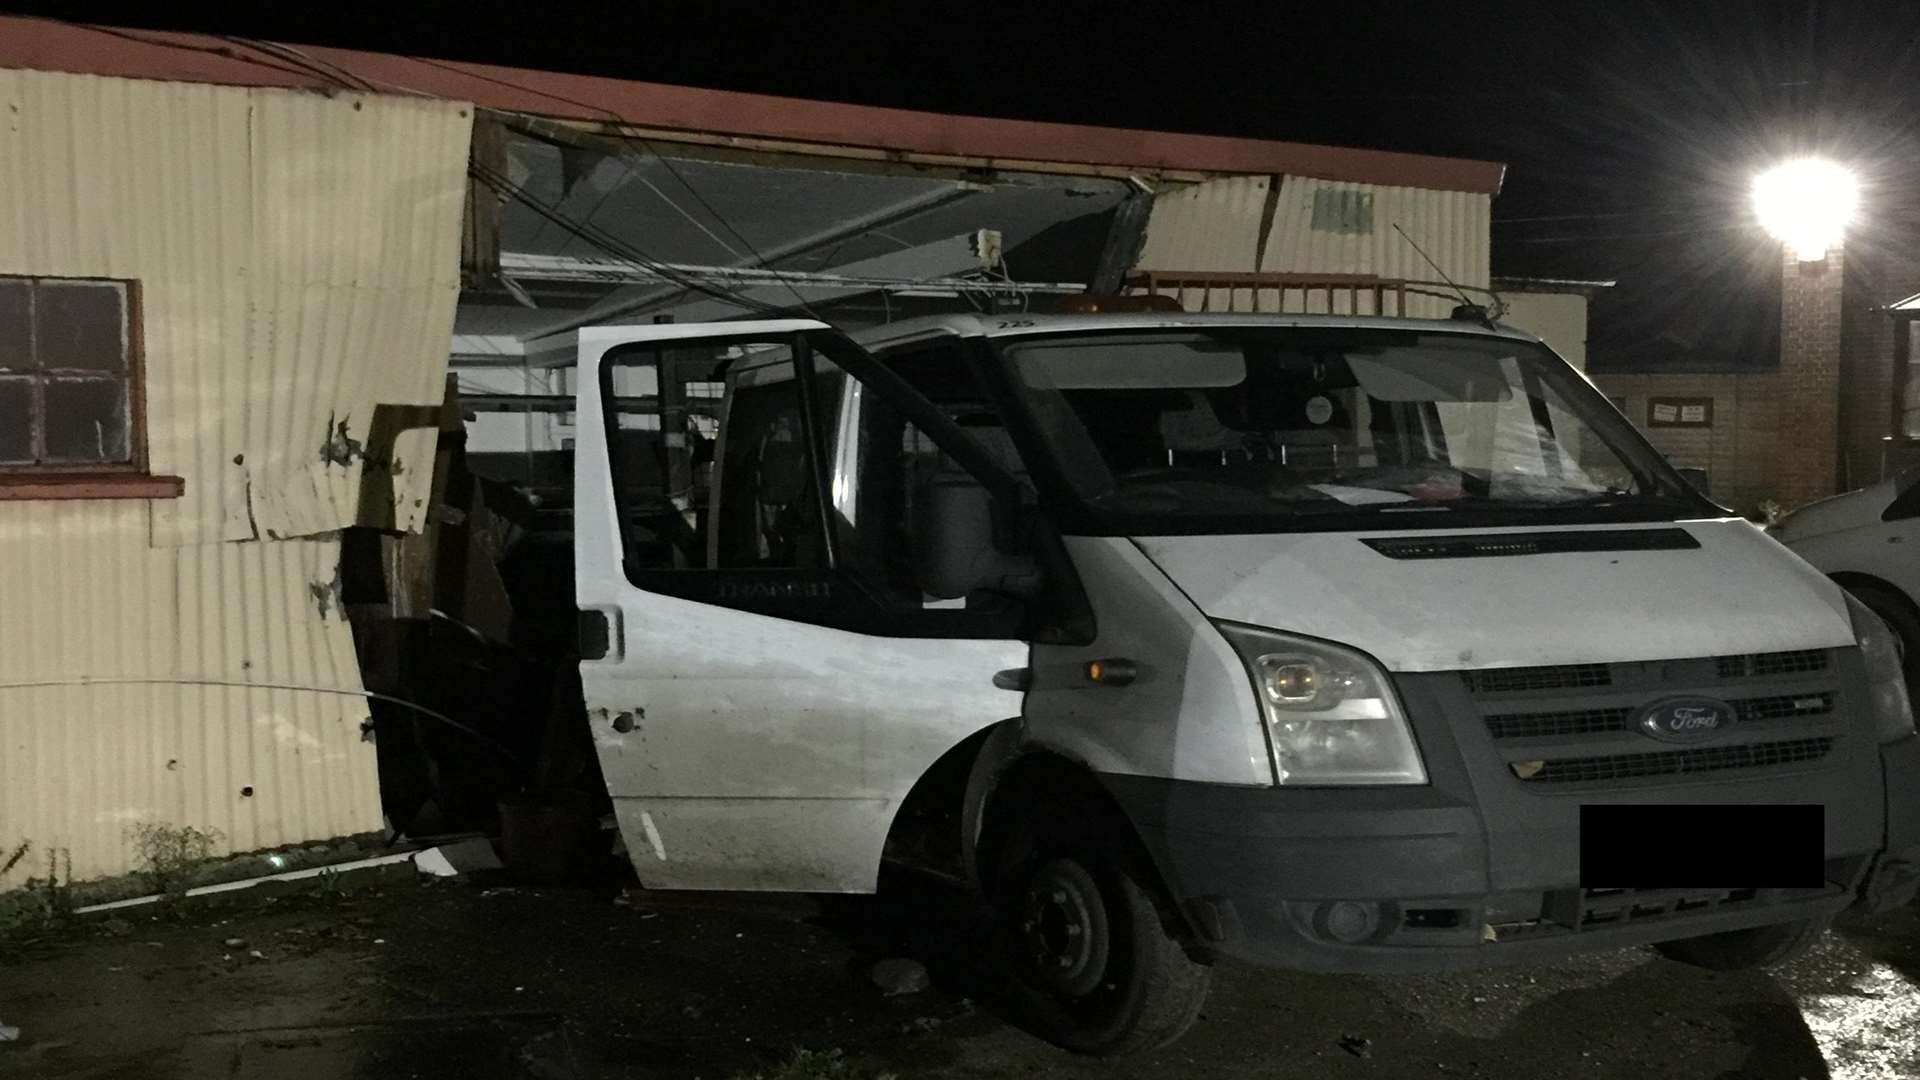 The van smashed into the back of the building.